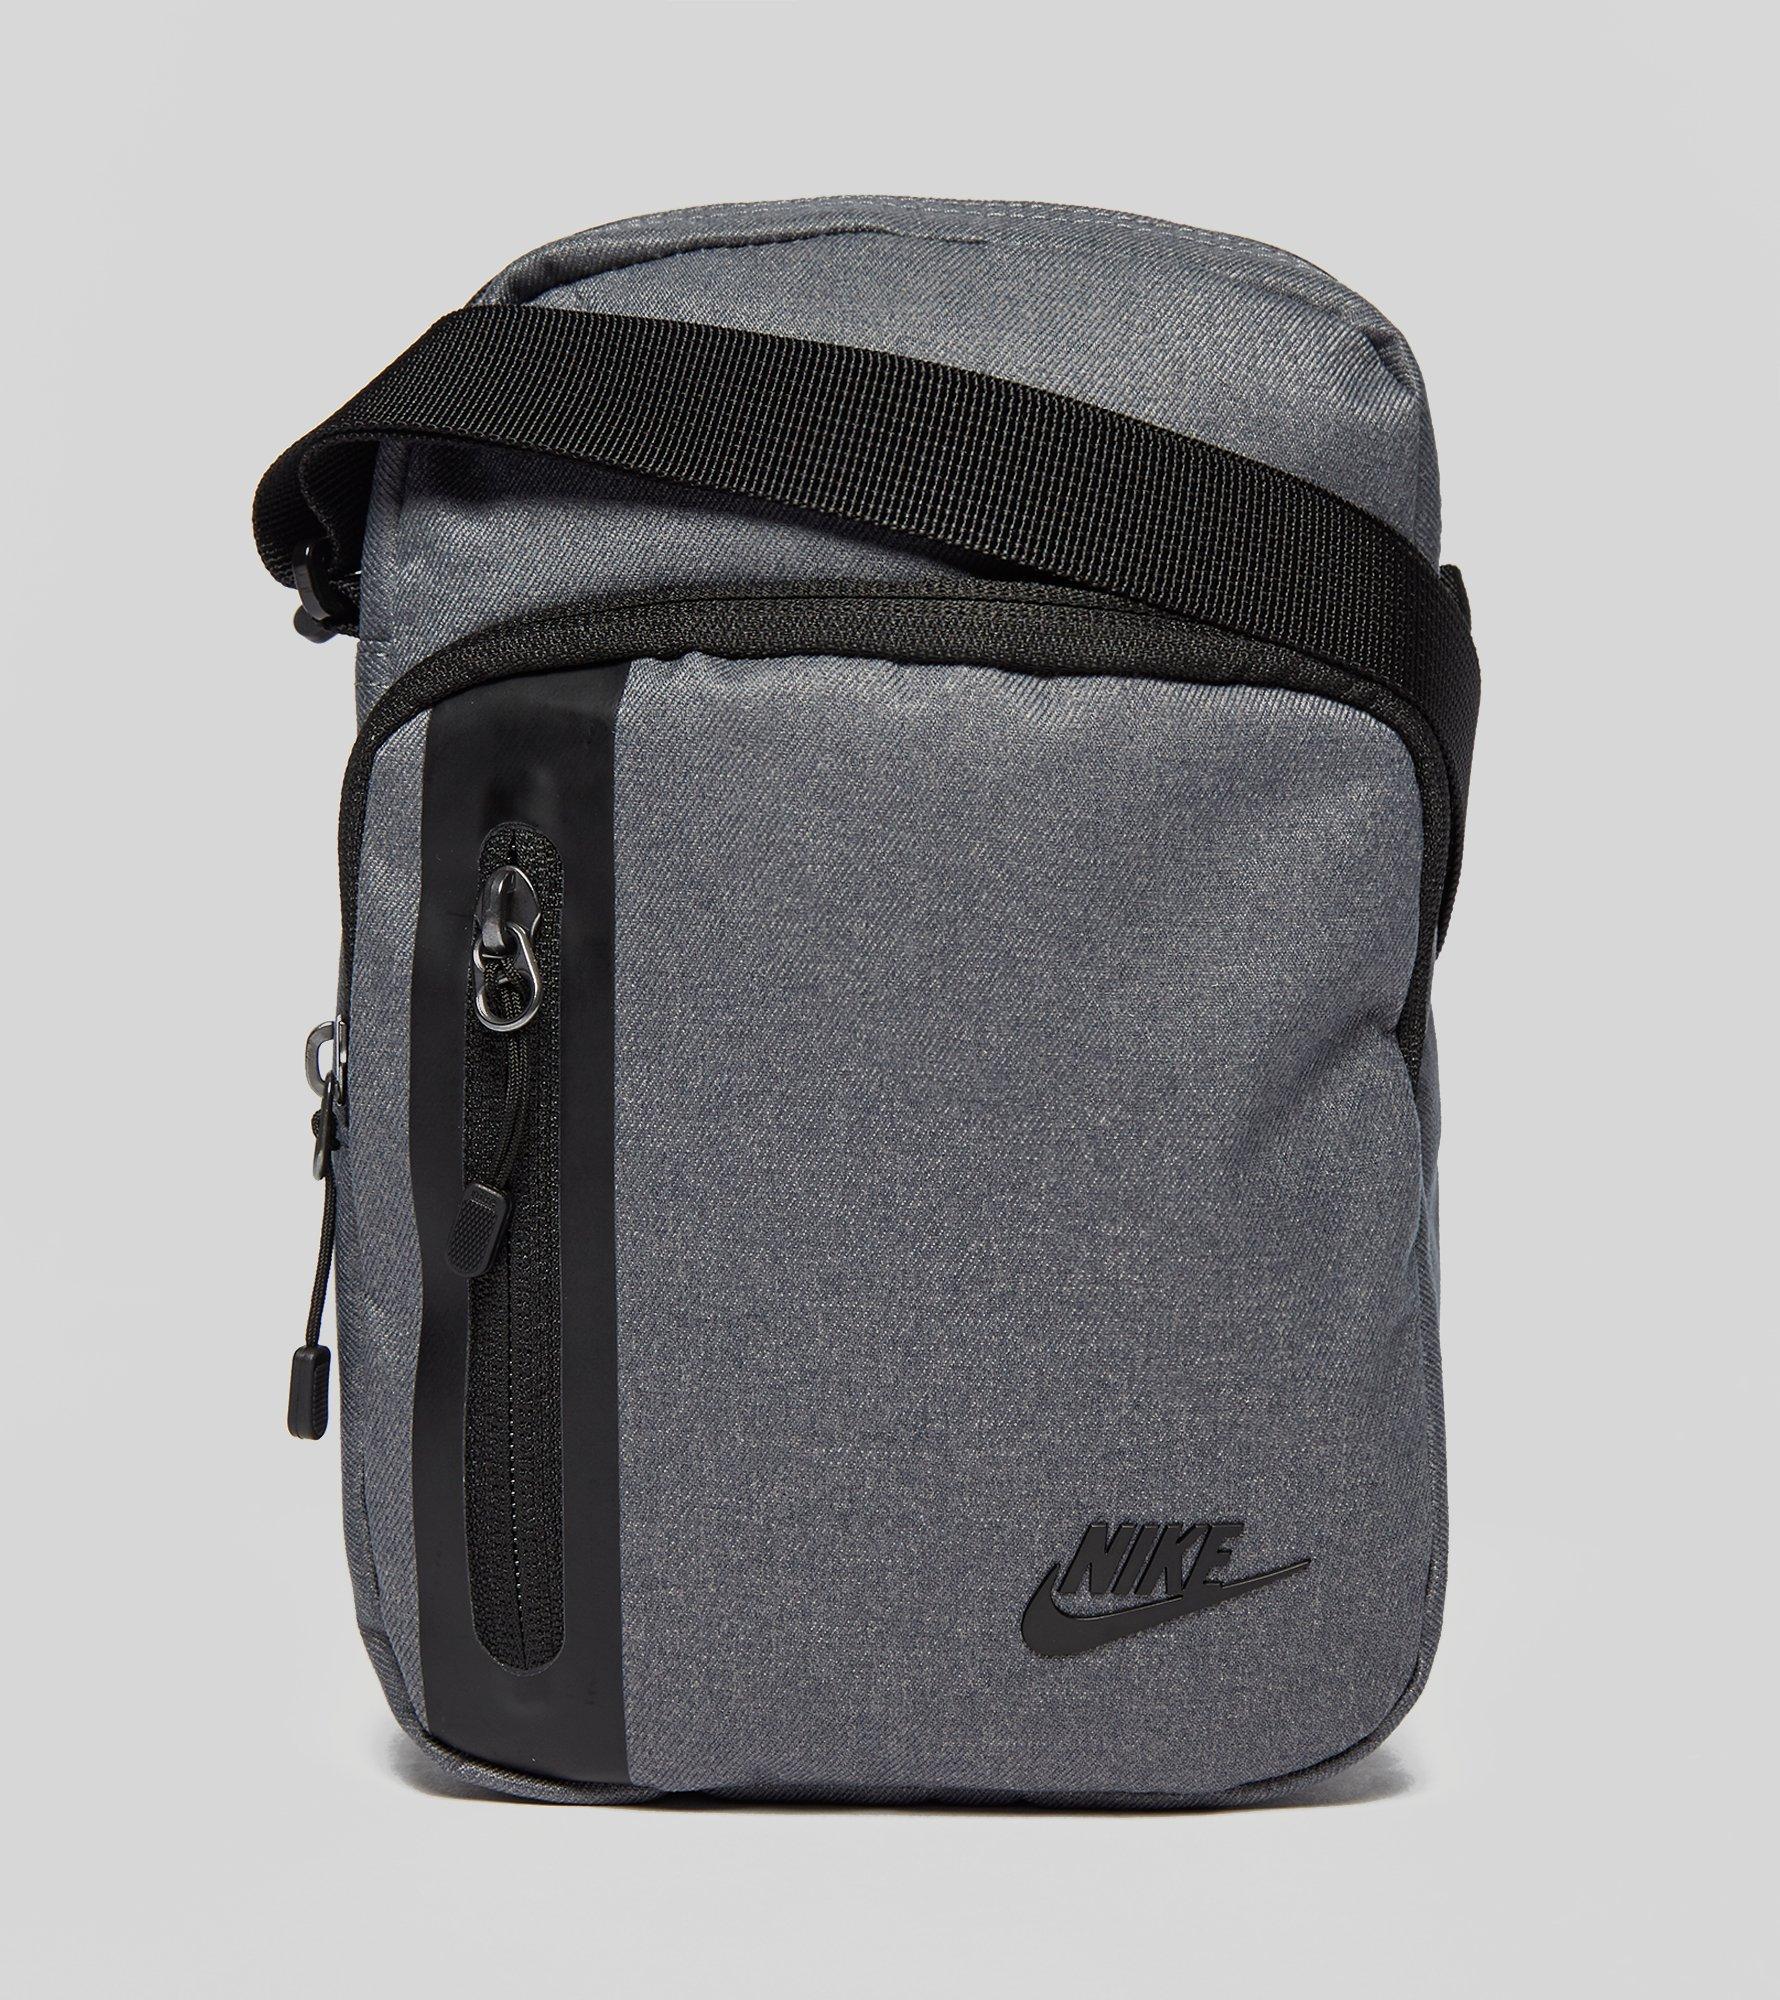 Lyst - Nike Core Small Crossbody Bag in Gray for Men